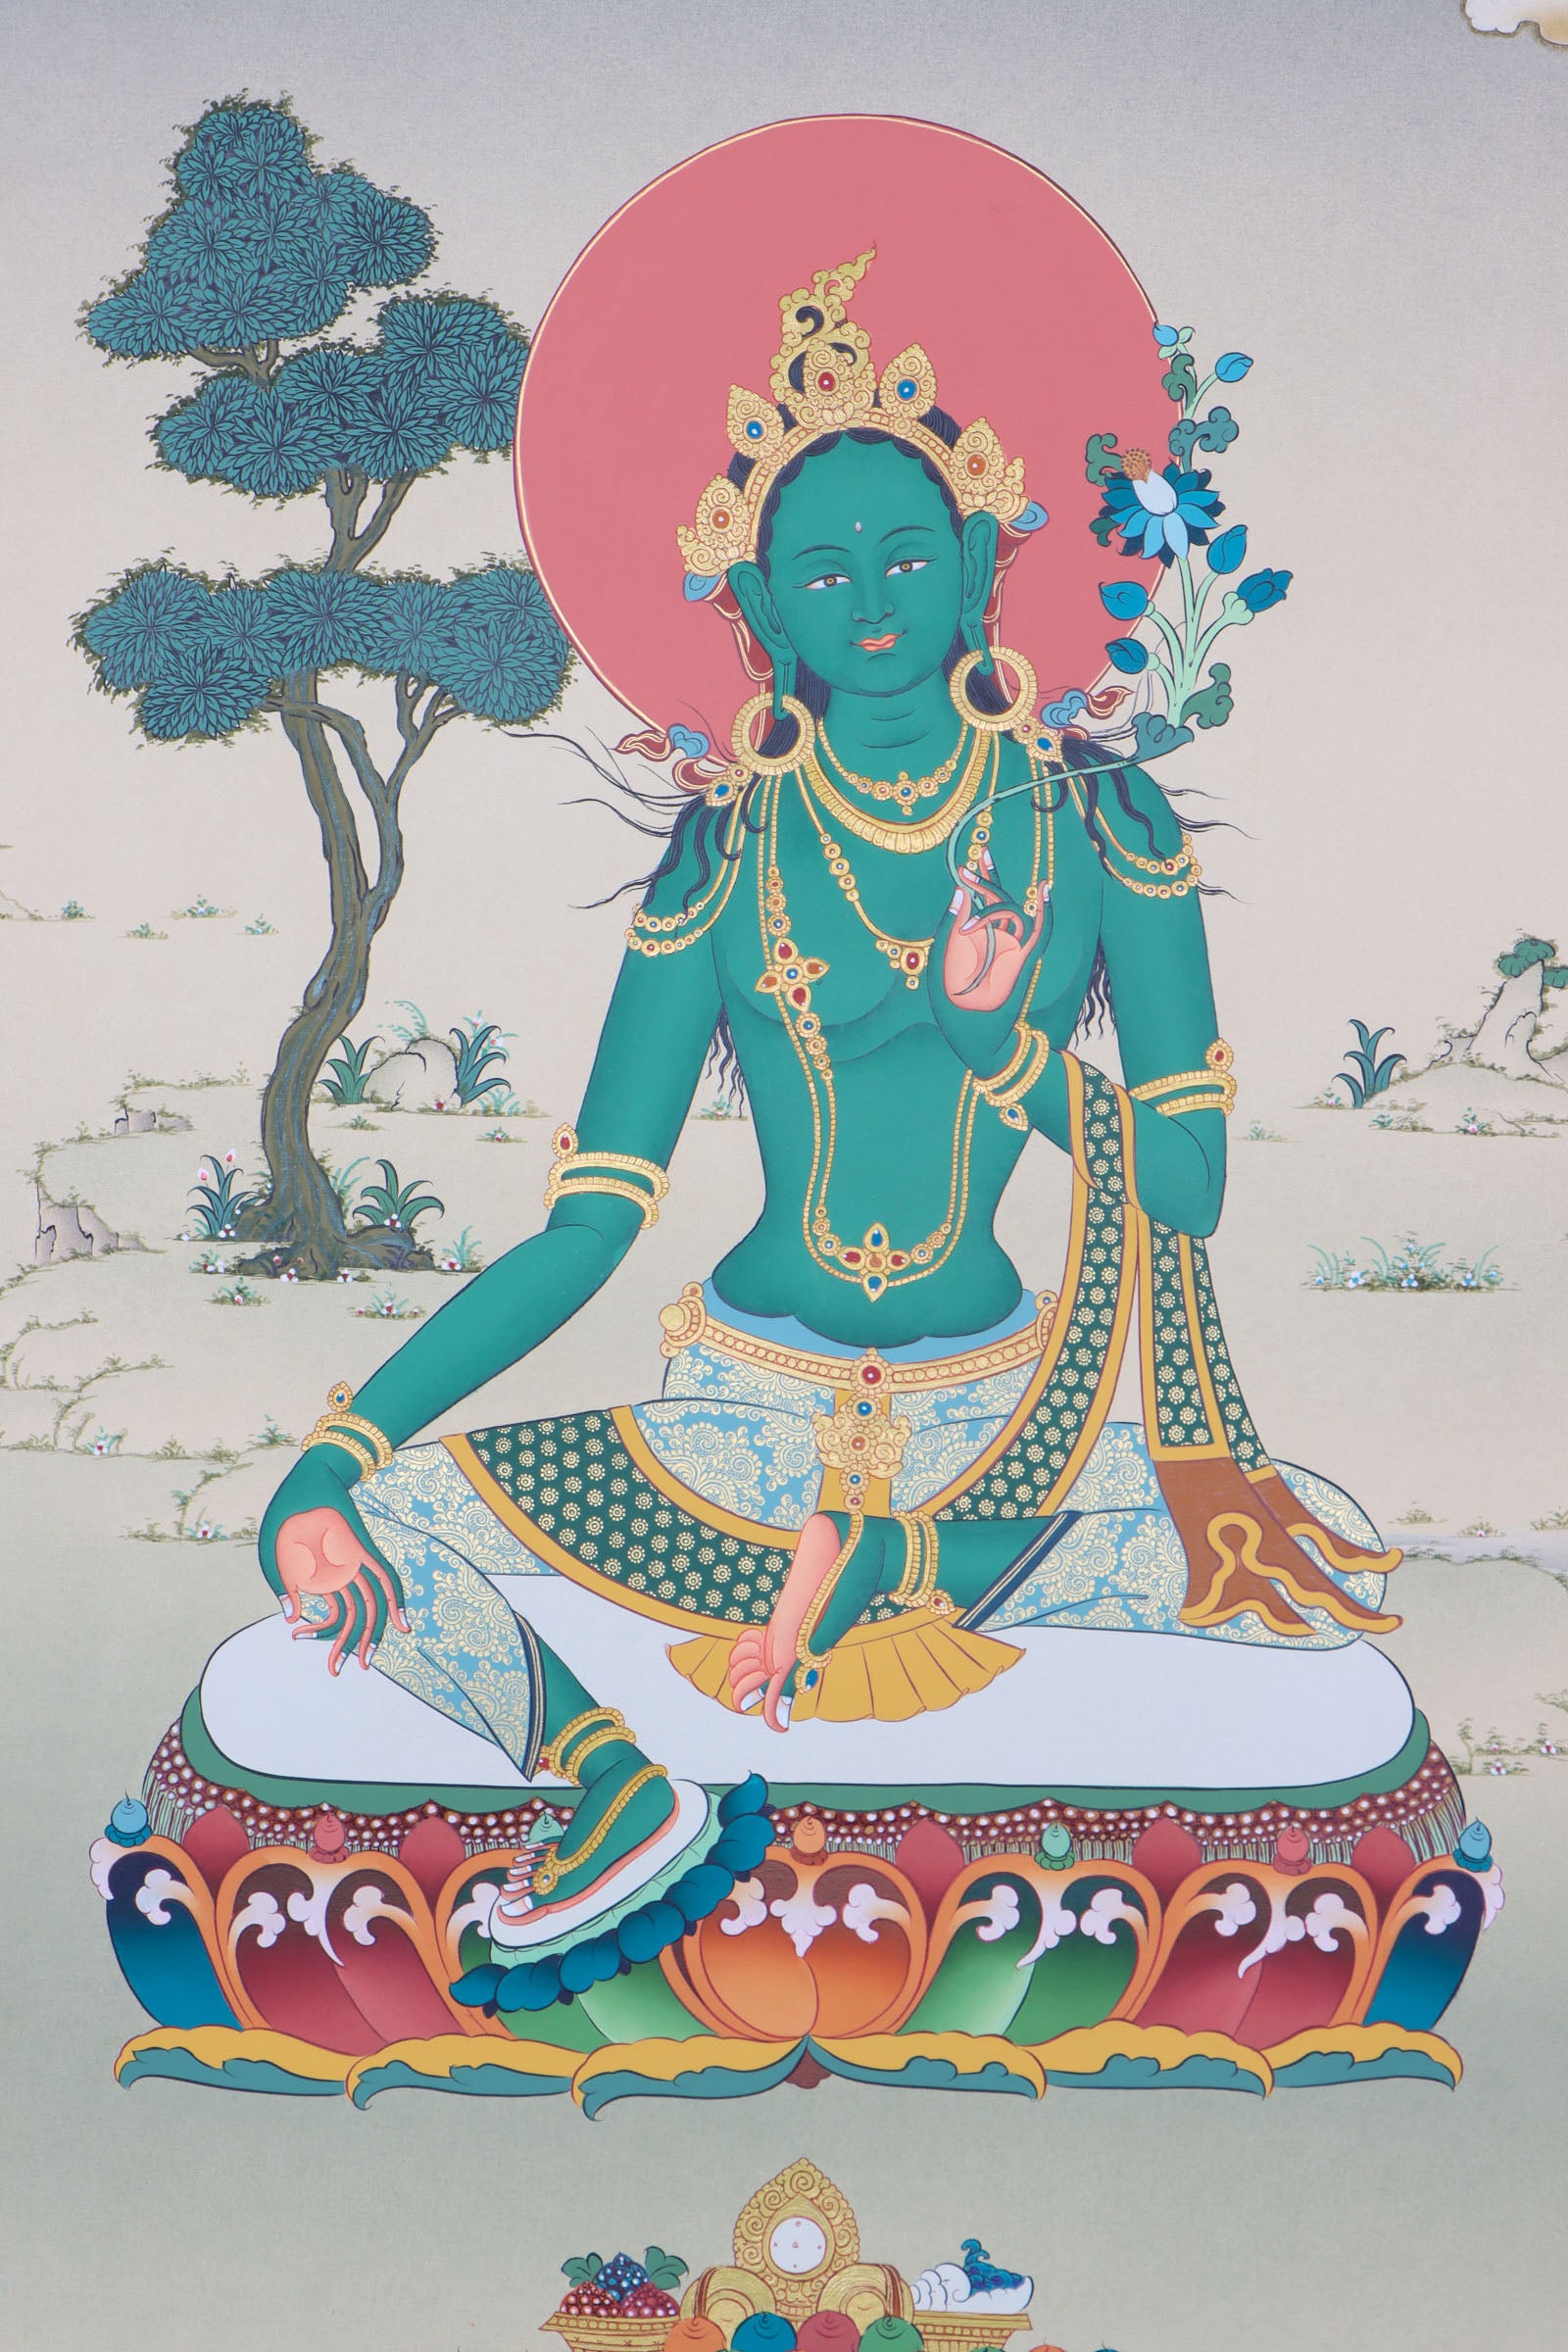 Green Tara thangka is a holy depiction of the famed Buddhist goddess